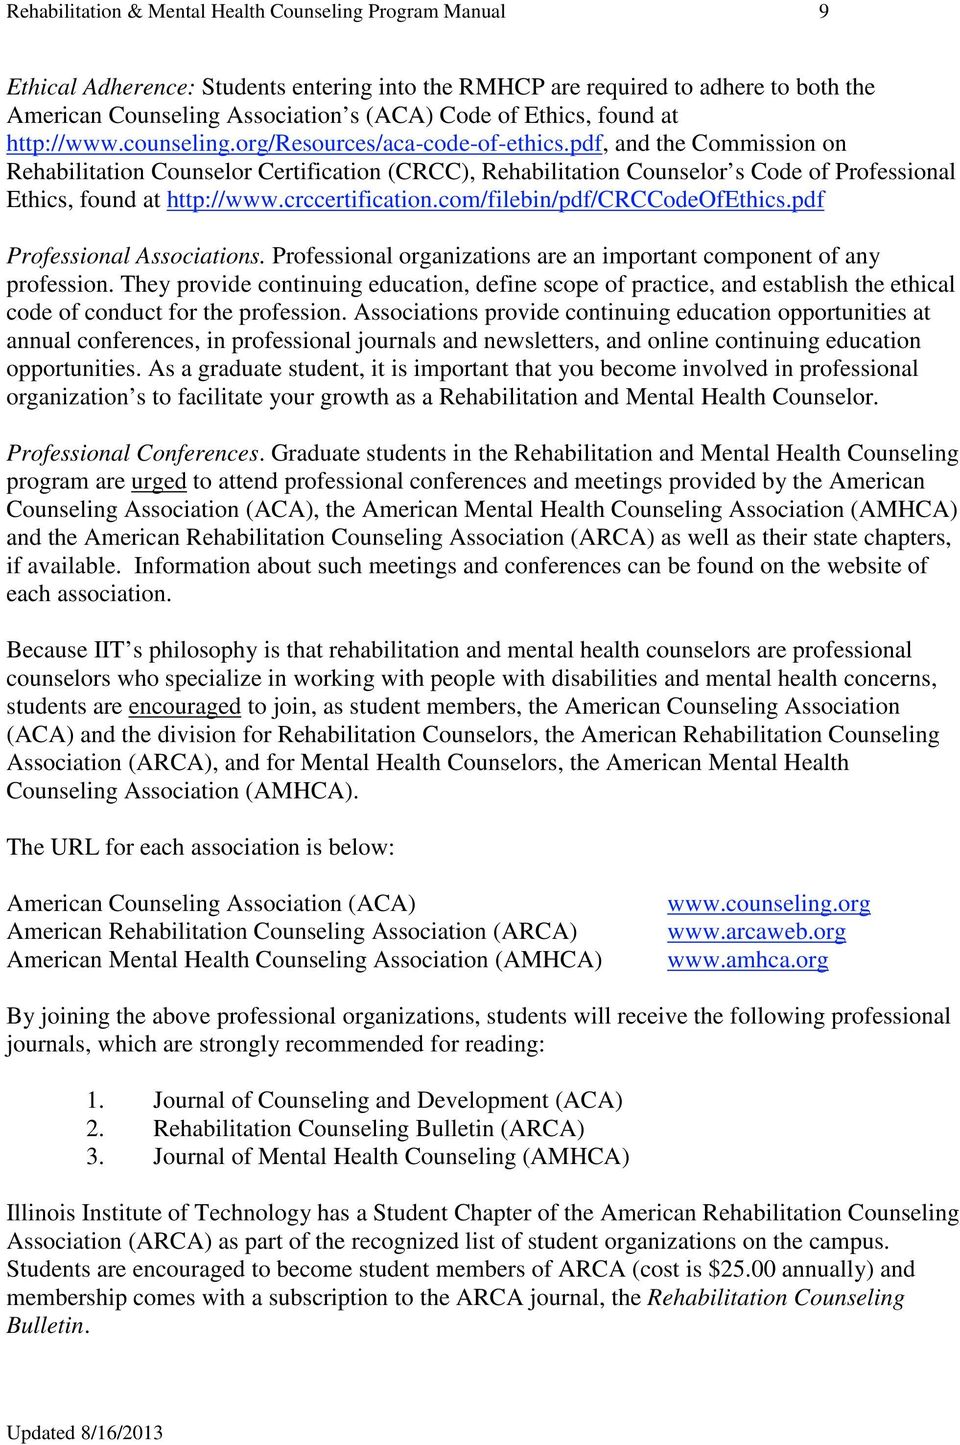 pdf, and the Commission on Rehabilitation Counselor Certification (CRCC), Rehabilitation Counselor s Code of Professional Ethics, found at http://www.crccertification.com/filebin/pdf/crccodeofethics.